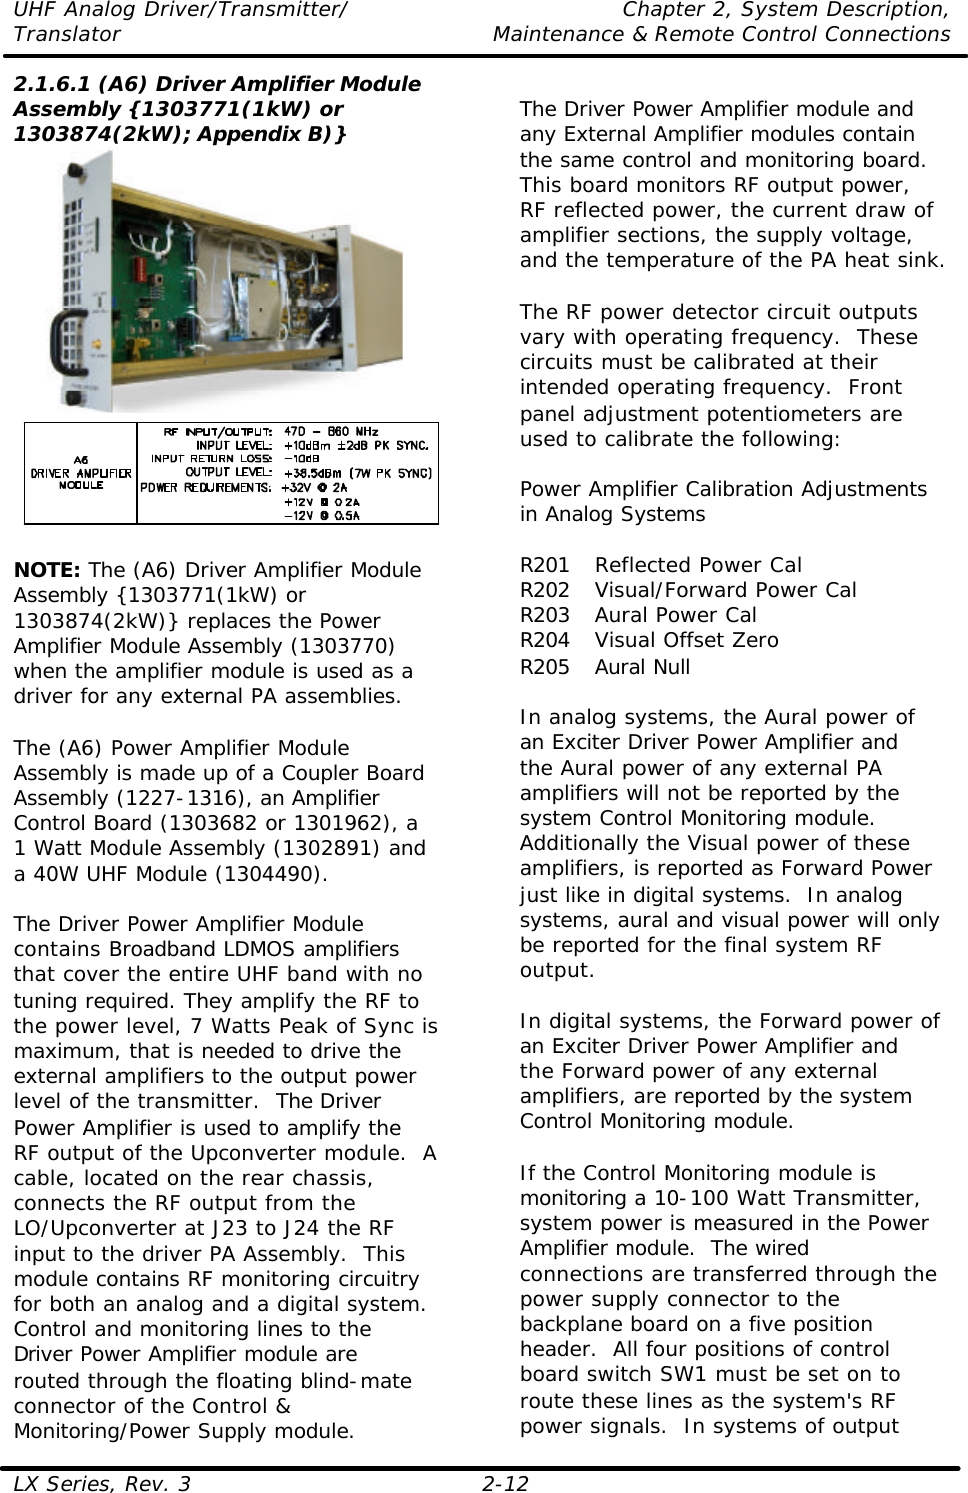 UHF Analog Driver/Transmitter/ Chapter 2, System Description, Translator Maintenance &amp; Remote Control Connections LX Series, Rev. 3 2-12 2.1.6.1 (A6) Driver Amplifier Module Assembly {1303771(1kW) or 1303874(2kW); Appendix B)}    NOTE: The (A6) Driver Amplifier Module Assembly {1303771(1kW) or 1303874(2kW)} replaces the Power Amplifier Module Assembly (1303770) when the amplifier module is used as a driver for any external PA assemblies.  The (A6) Power Amplifier Module Assembly is made up of a Coupler Board Assembly (1227-1316), an Amplifier Control Board (1303682 or 1301962), a 1 Watt Module Assembly (1302891) and a 40W UHF Module (1304490).  The Driver Power Amplifier Module contains Broadband LDMOS amplifiers that cover the entire UHF band with no tuning required. They amplify the RF to the power level, 7 Watts Peak of Sync is maximum, that is needed to drive the external amplifiers to the output power level of the transmitter.  The Driver Power Amplifier is used to amplify the RF output of the Upconverter module.  A cable, located on the rear chassis, connects the RF output from the LO/Upconverter at J23 to J24 the RF input to the driver PA Assembly.  This module contains RF monitoring circuitry for both an analog and a digital system.  Control and monitoring lines to the Driver Power Amplifier module are routed through the floating blind-mate connector of the Control &amp; Monitoring/Power Supply module.  The Driver Power Amplifier module and any External Amplifier modules contain the same control and monitoring board.  This board monitors RF output power, RF reflected power, the current draw of amplifier sections, the supply voltage, and the temperature of the PA heat sink.  The RF power detector circuit outputs vary with operating frequency.  These circuits must be calibrated at their intended operating frequency.  Front panel adjustment potentiometers are used to calibrate the following:  Power Amplifier Calibration Adjustments in Analog Systems  R201 Reflected Power Cal R202 Visual/Forward Power Cal R203 Aural Power Cal R204 Visual Offset Zero R205 Aural Null  In analog systems, the Aural power of an Exciter Driver Power Amplifier and the Aural power of any external PA amplifiers will not be reported by the system Control Monitoring module.  Additionally the Visual power of these amplifiers, is reported as Forward Power just like in digital systems.  In analog systems, aural and visual power will only be reported for the final system RF output.    In digital systems, the Forward power of an Exciter Driver Power Amplifier and the Forward power of any external amplifiers, are reported by the system Control Monitoring module.   If the Control Monitoring module is monitoring a 10-100 Watt Transmitter, system power is measured in the Power Amplifier module.  The wired connections are transferred through the power supply connector to the backplane board on a five position header.  All four positions of control board switch SW1 must be set on to route these lines as the system&apos;s RF power signals.  In systems of output 